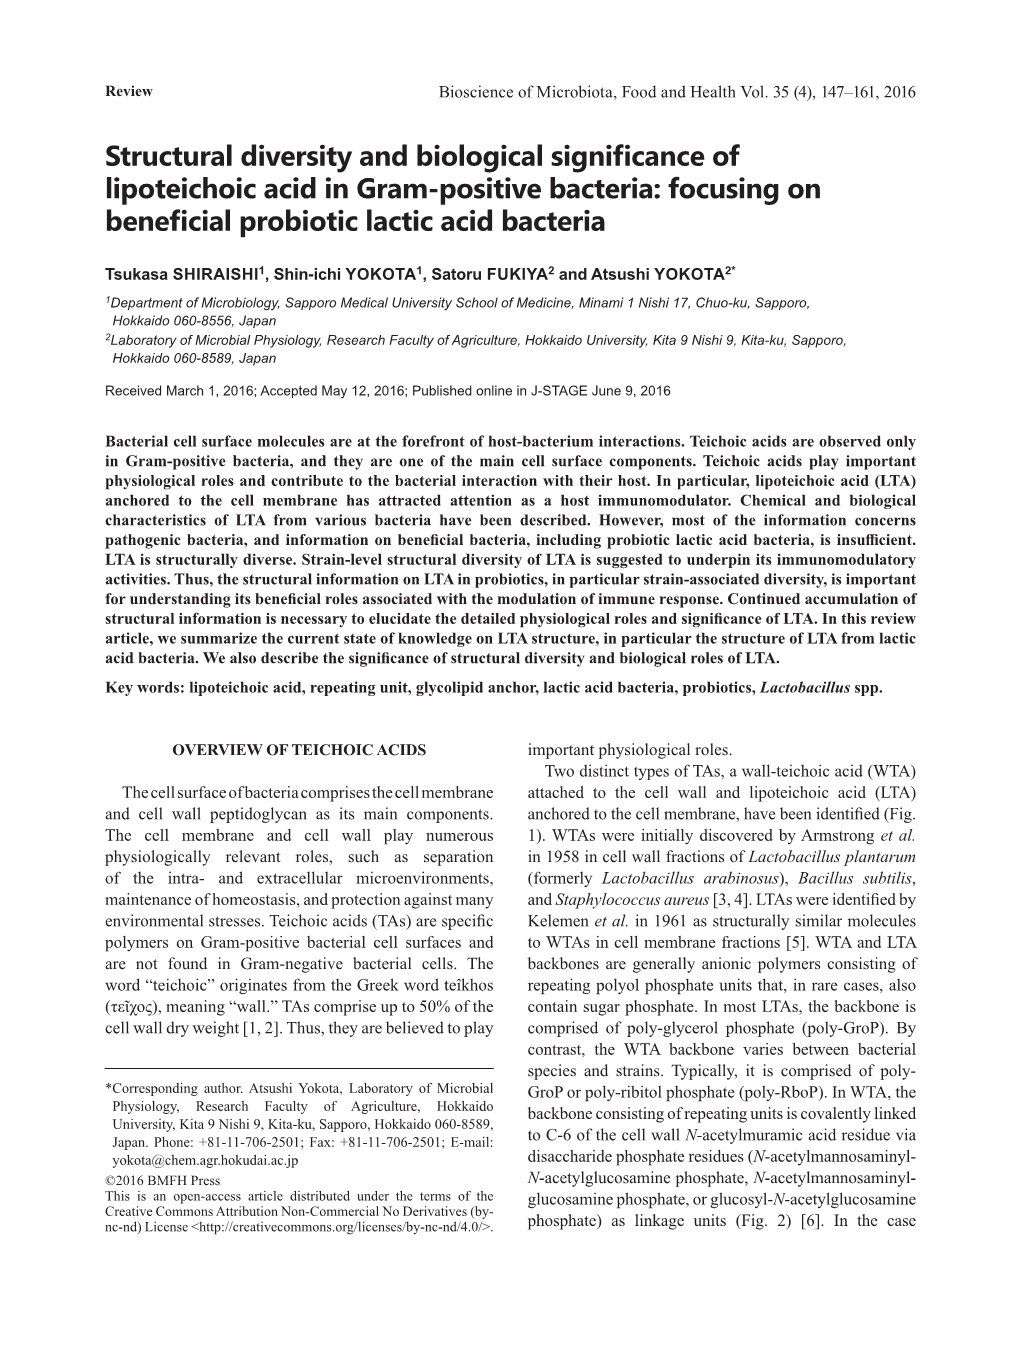 Structural Diversity and Biological Significance of Lipoteichoic Acid in Gram-Positive Bacteria: Focusing on Beneficial Probiotic Lactic Acid Bacteria